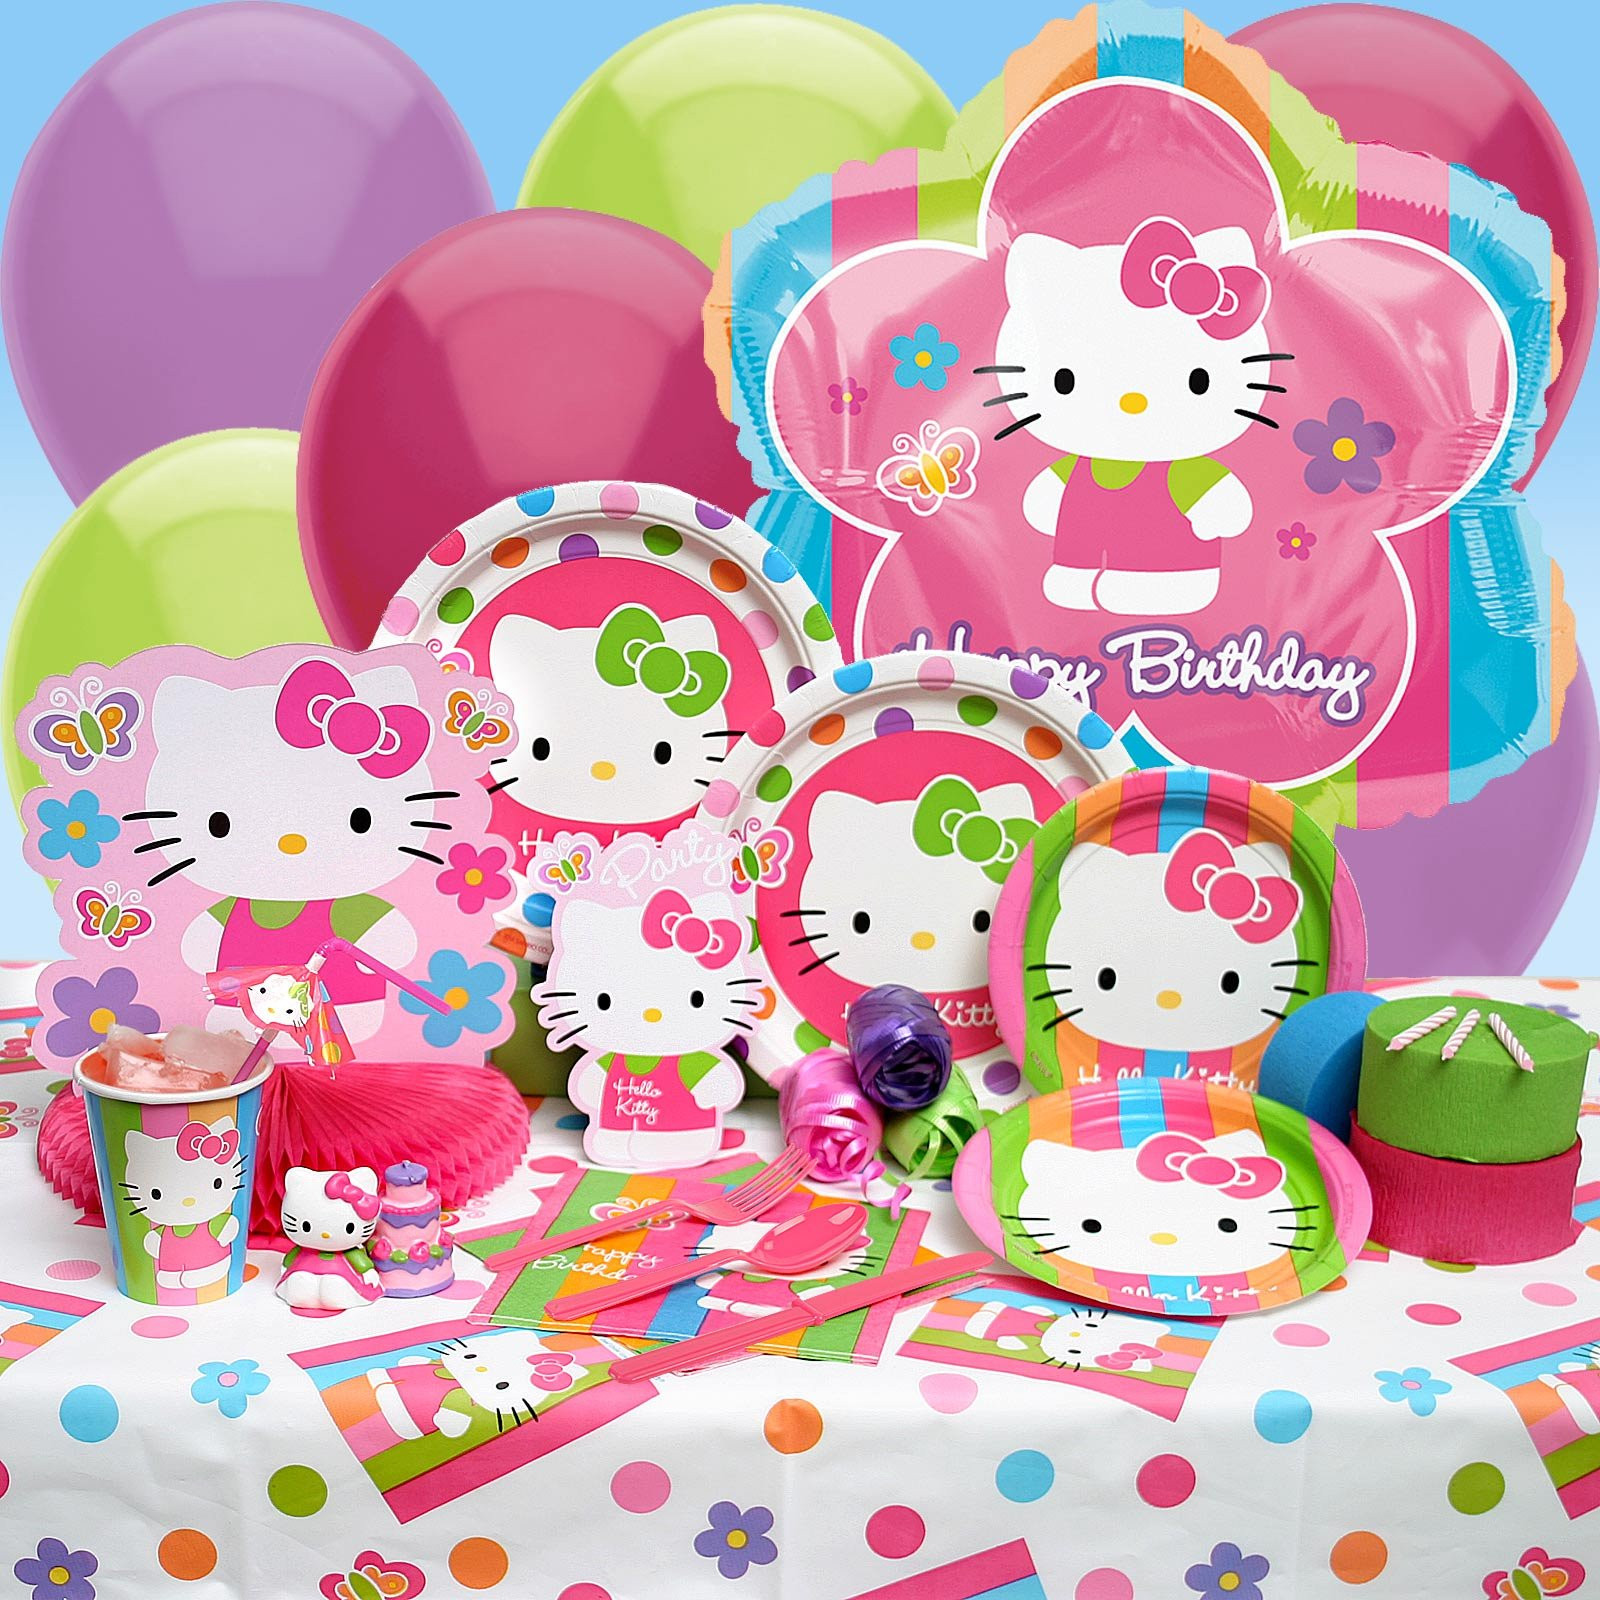 Hello Kitty Birthday Party Supplies
 Sealed With a Kiss